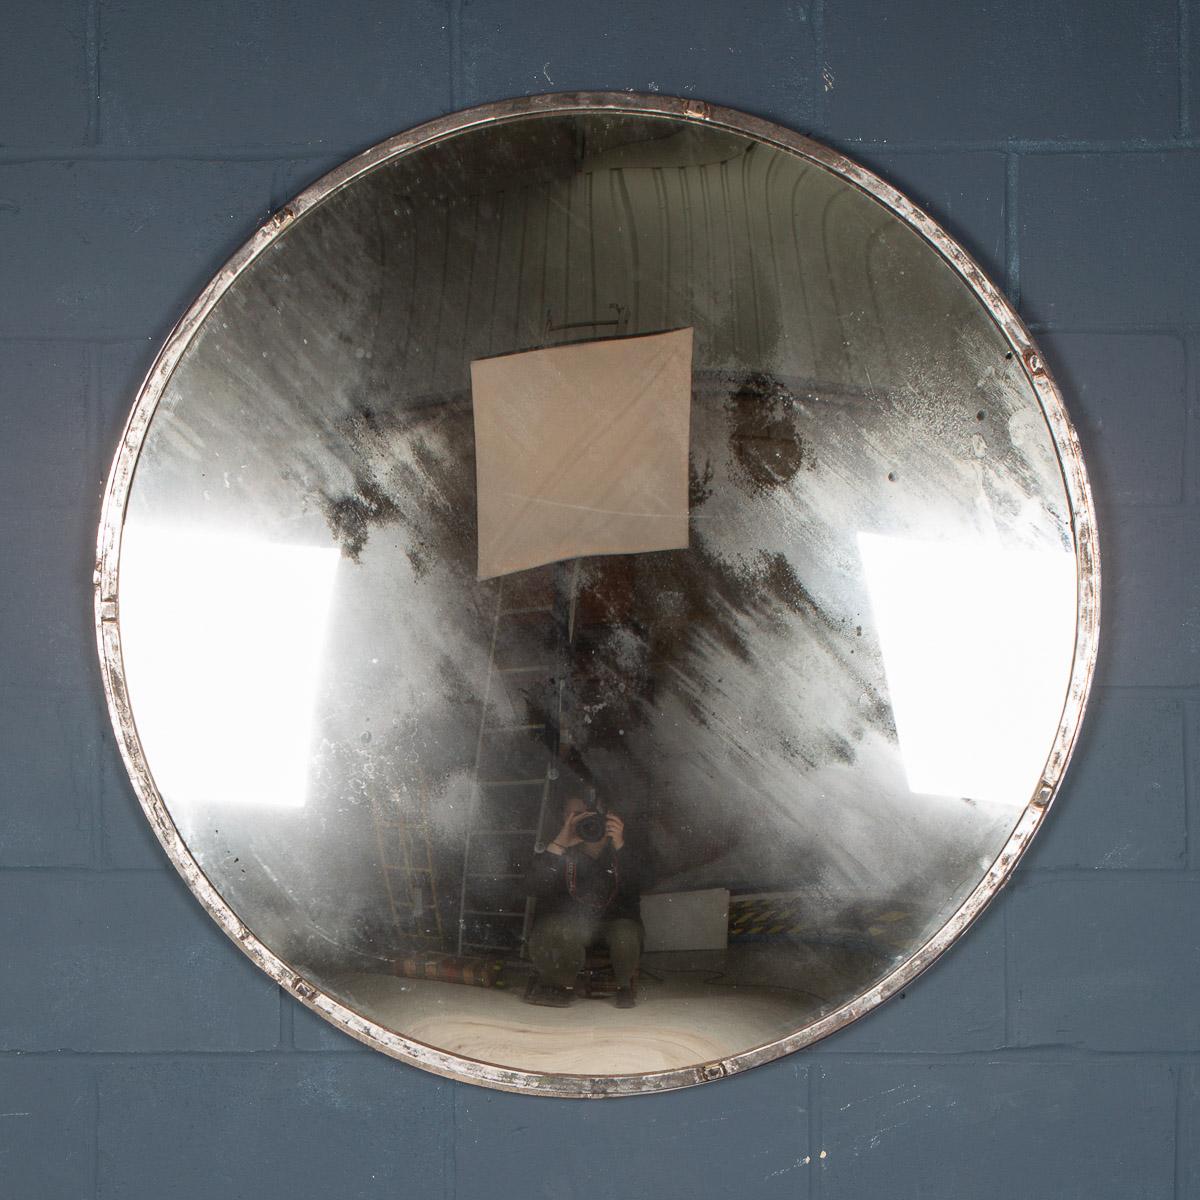 One of the most dramatic pieces of interior design furniture for any home, this railway mirror was manufactured in Czechoslovakia around the middle of the last century. Measuring an impressive 125cm in diameter, it is slightly convex (fish-eyed) to